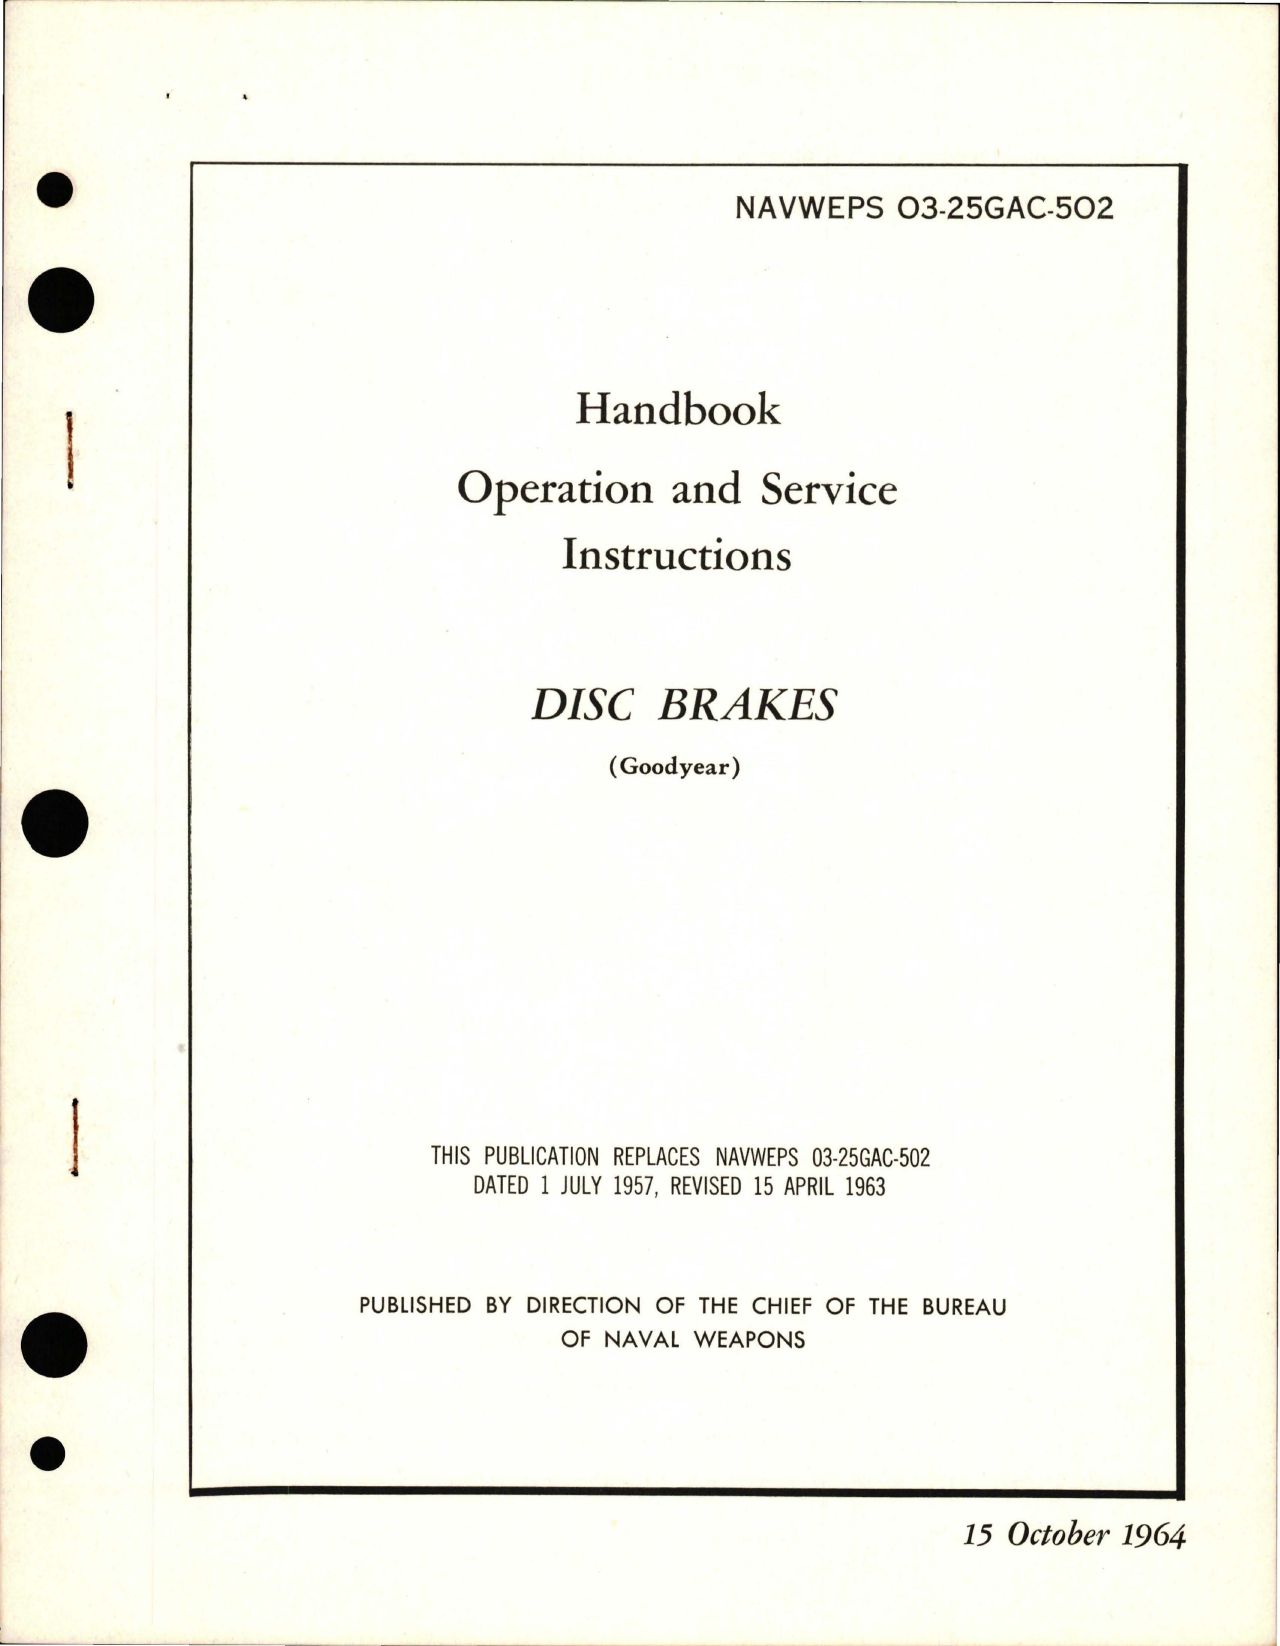 Sample page 1 from AirCorps Library document: Operation and Service Instructions for Disc Brakes